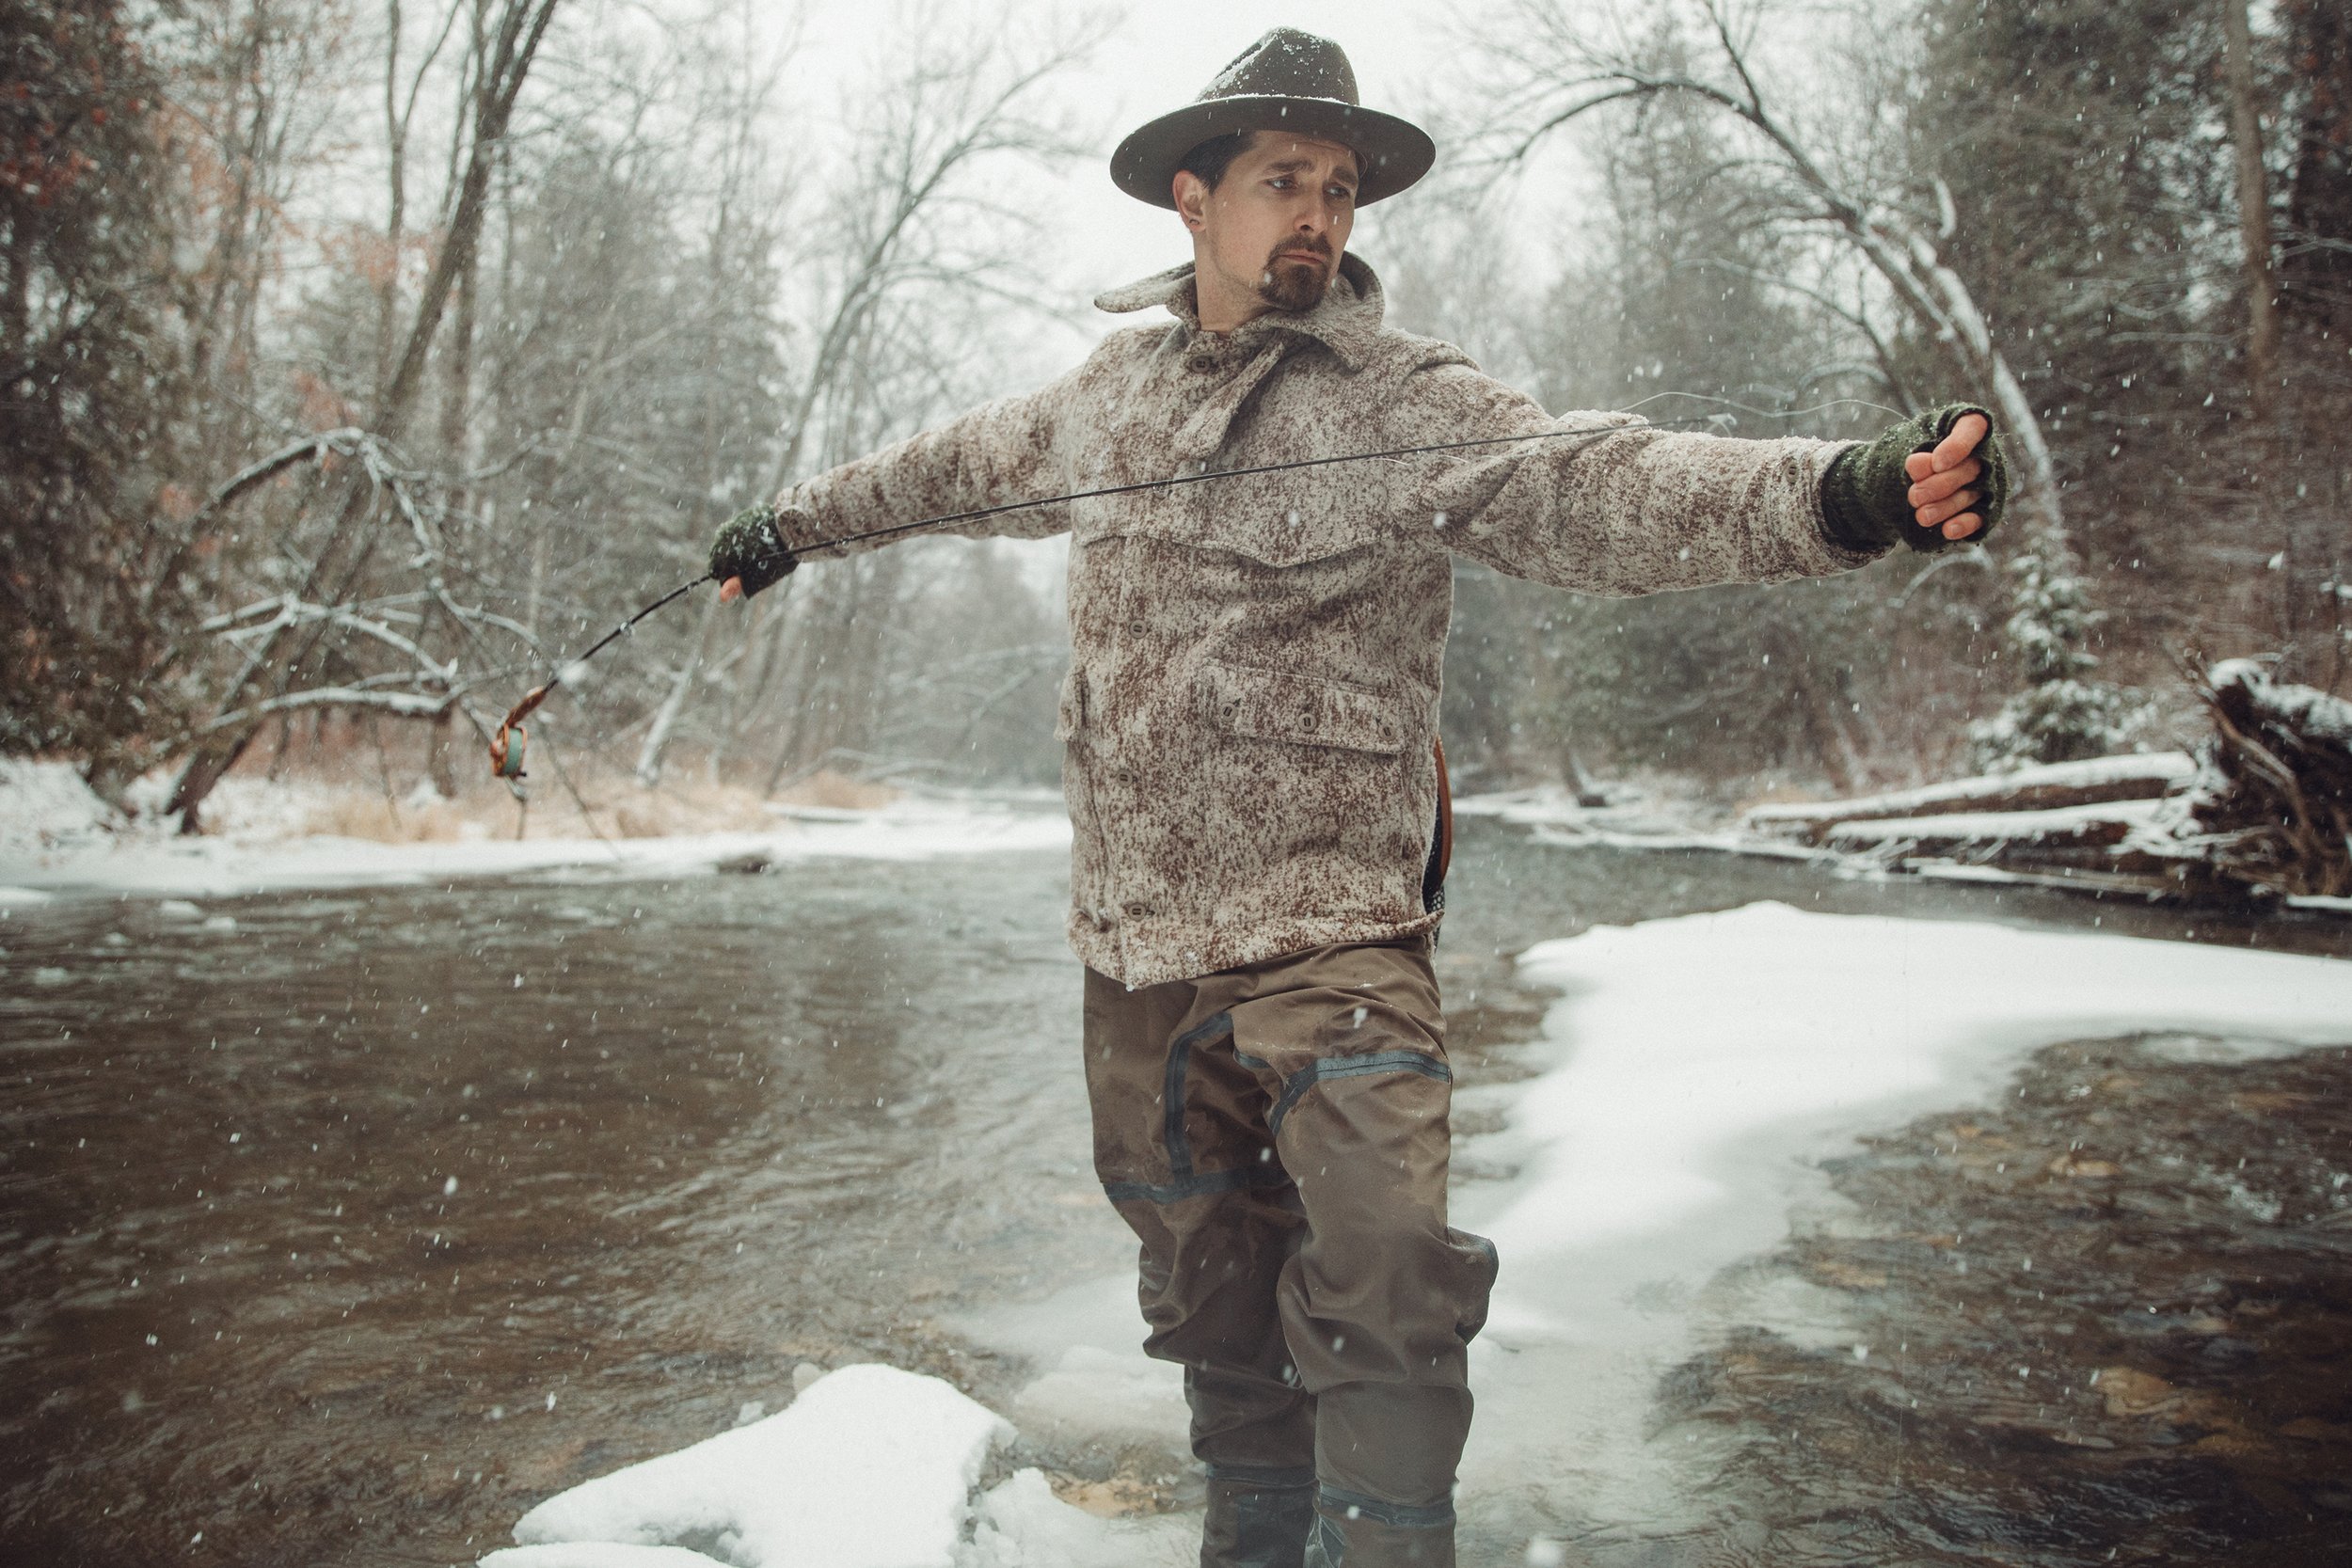  Cody Bokshowan fly fishing on his home river in his Lynx Pattern All Around Jacket from WeatherWool. 